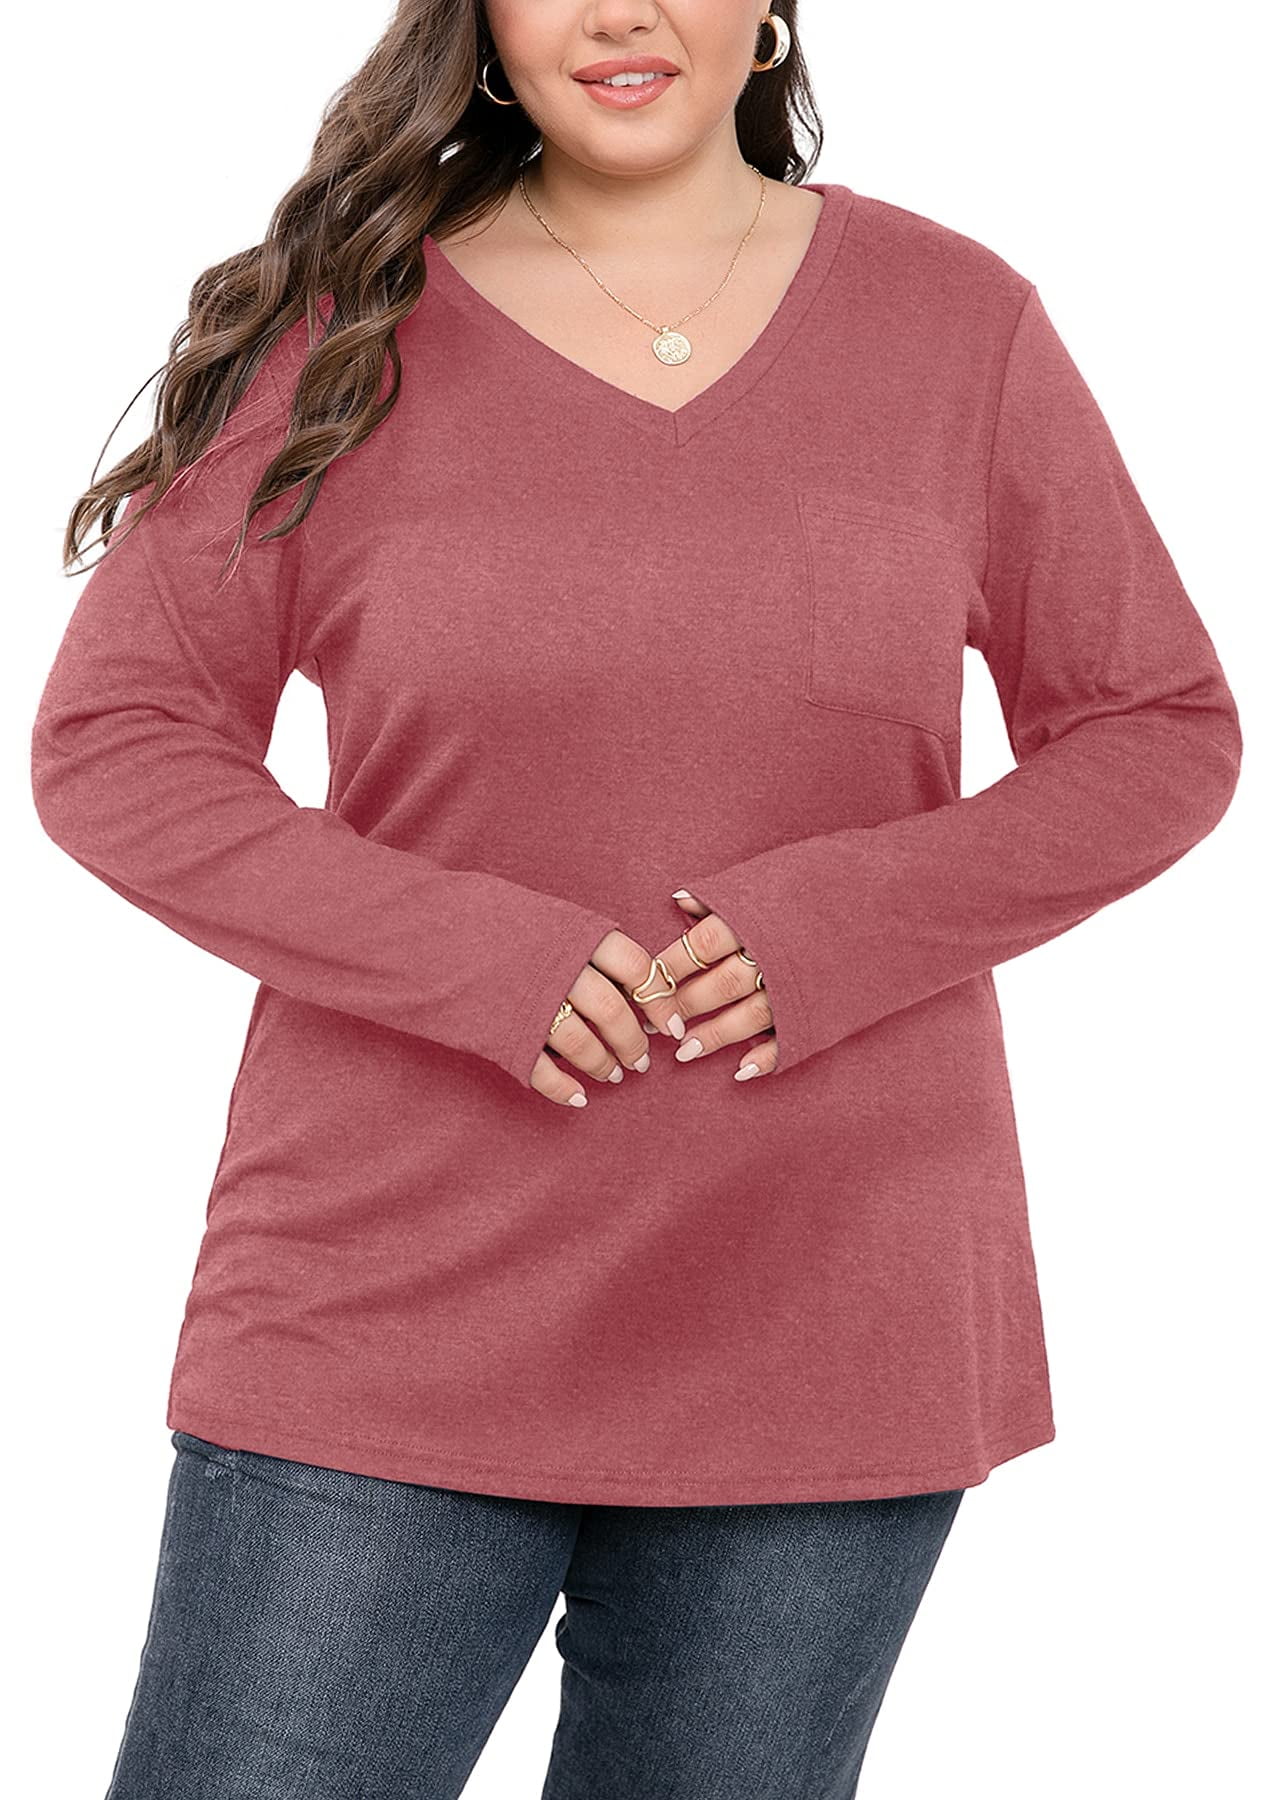 SHOWMALL Plus Size Tops for Women Long Sleeve Brownish Red 2X T Shirt V ...